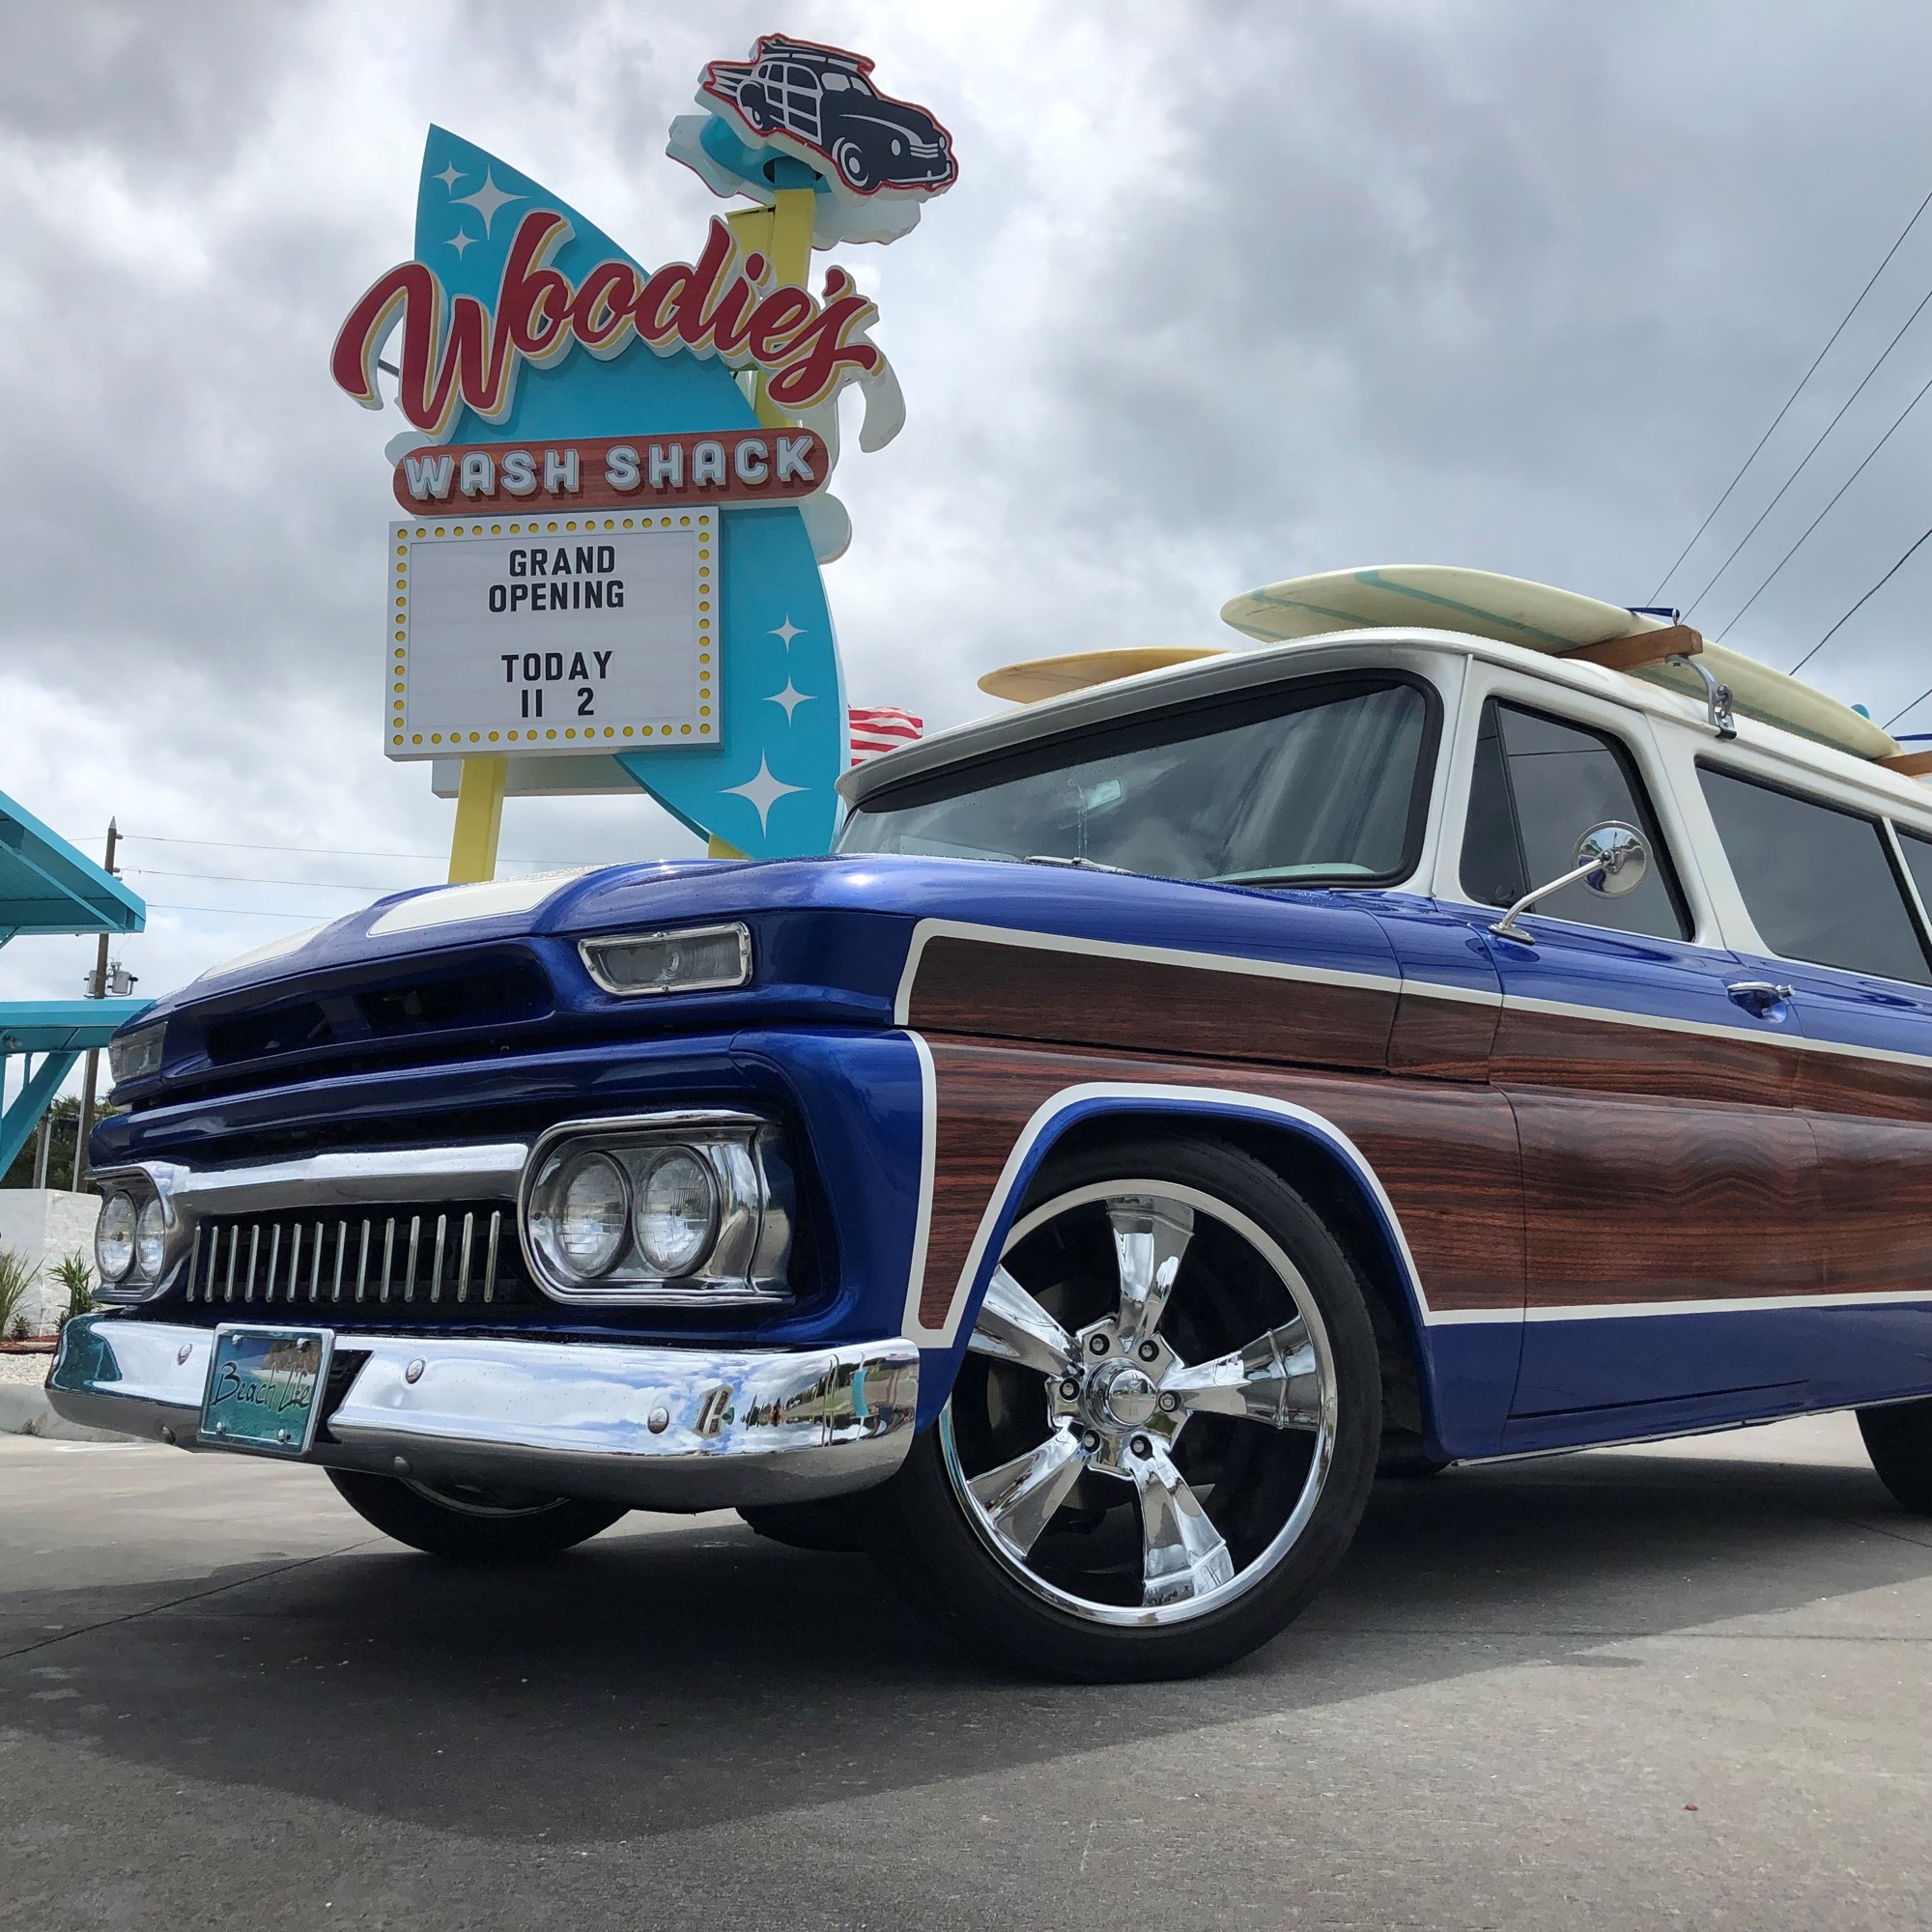 Woodie's Wash Shack brand leans heavily on surfing and classic-car imagery. Courtesy photo.